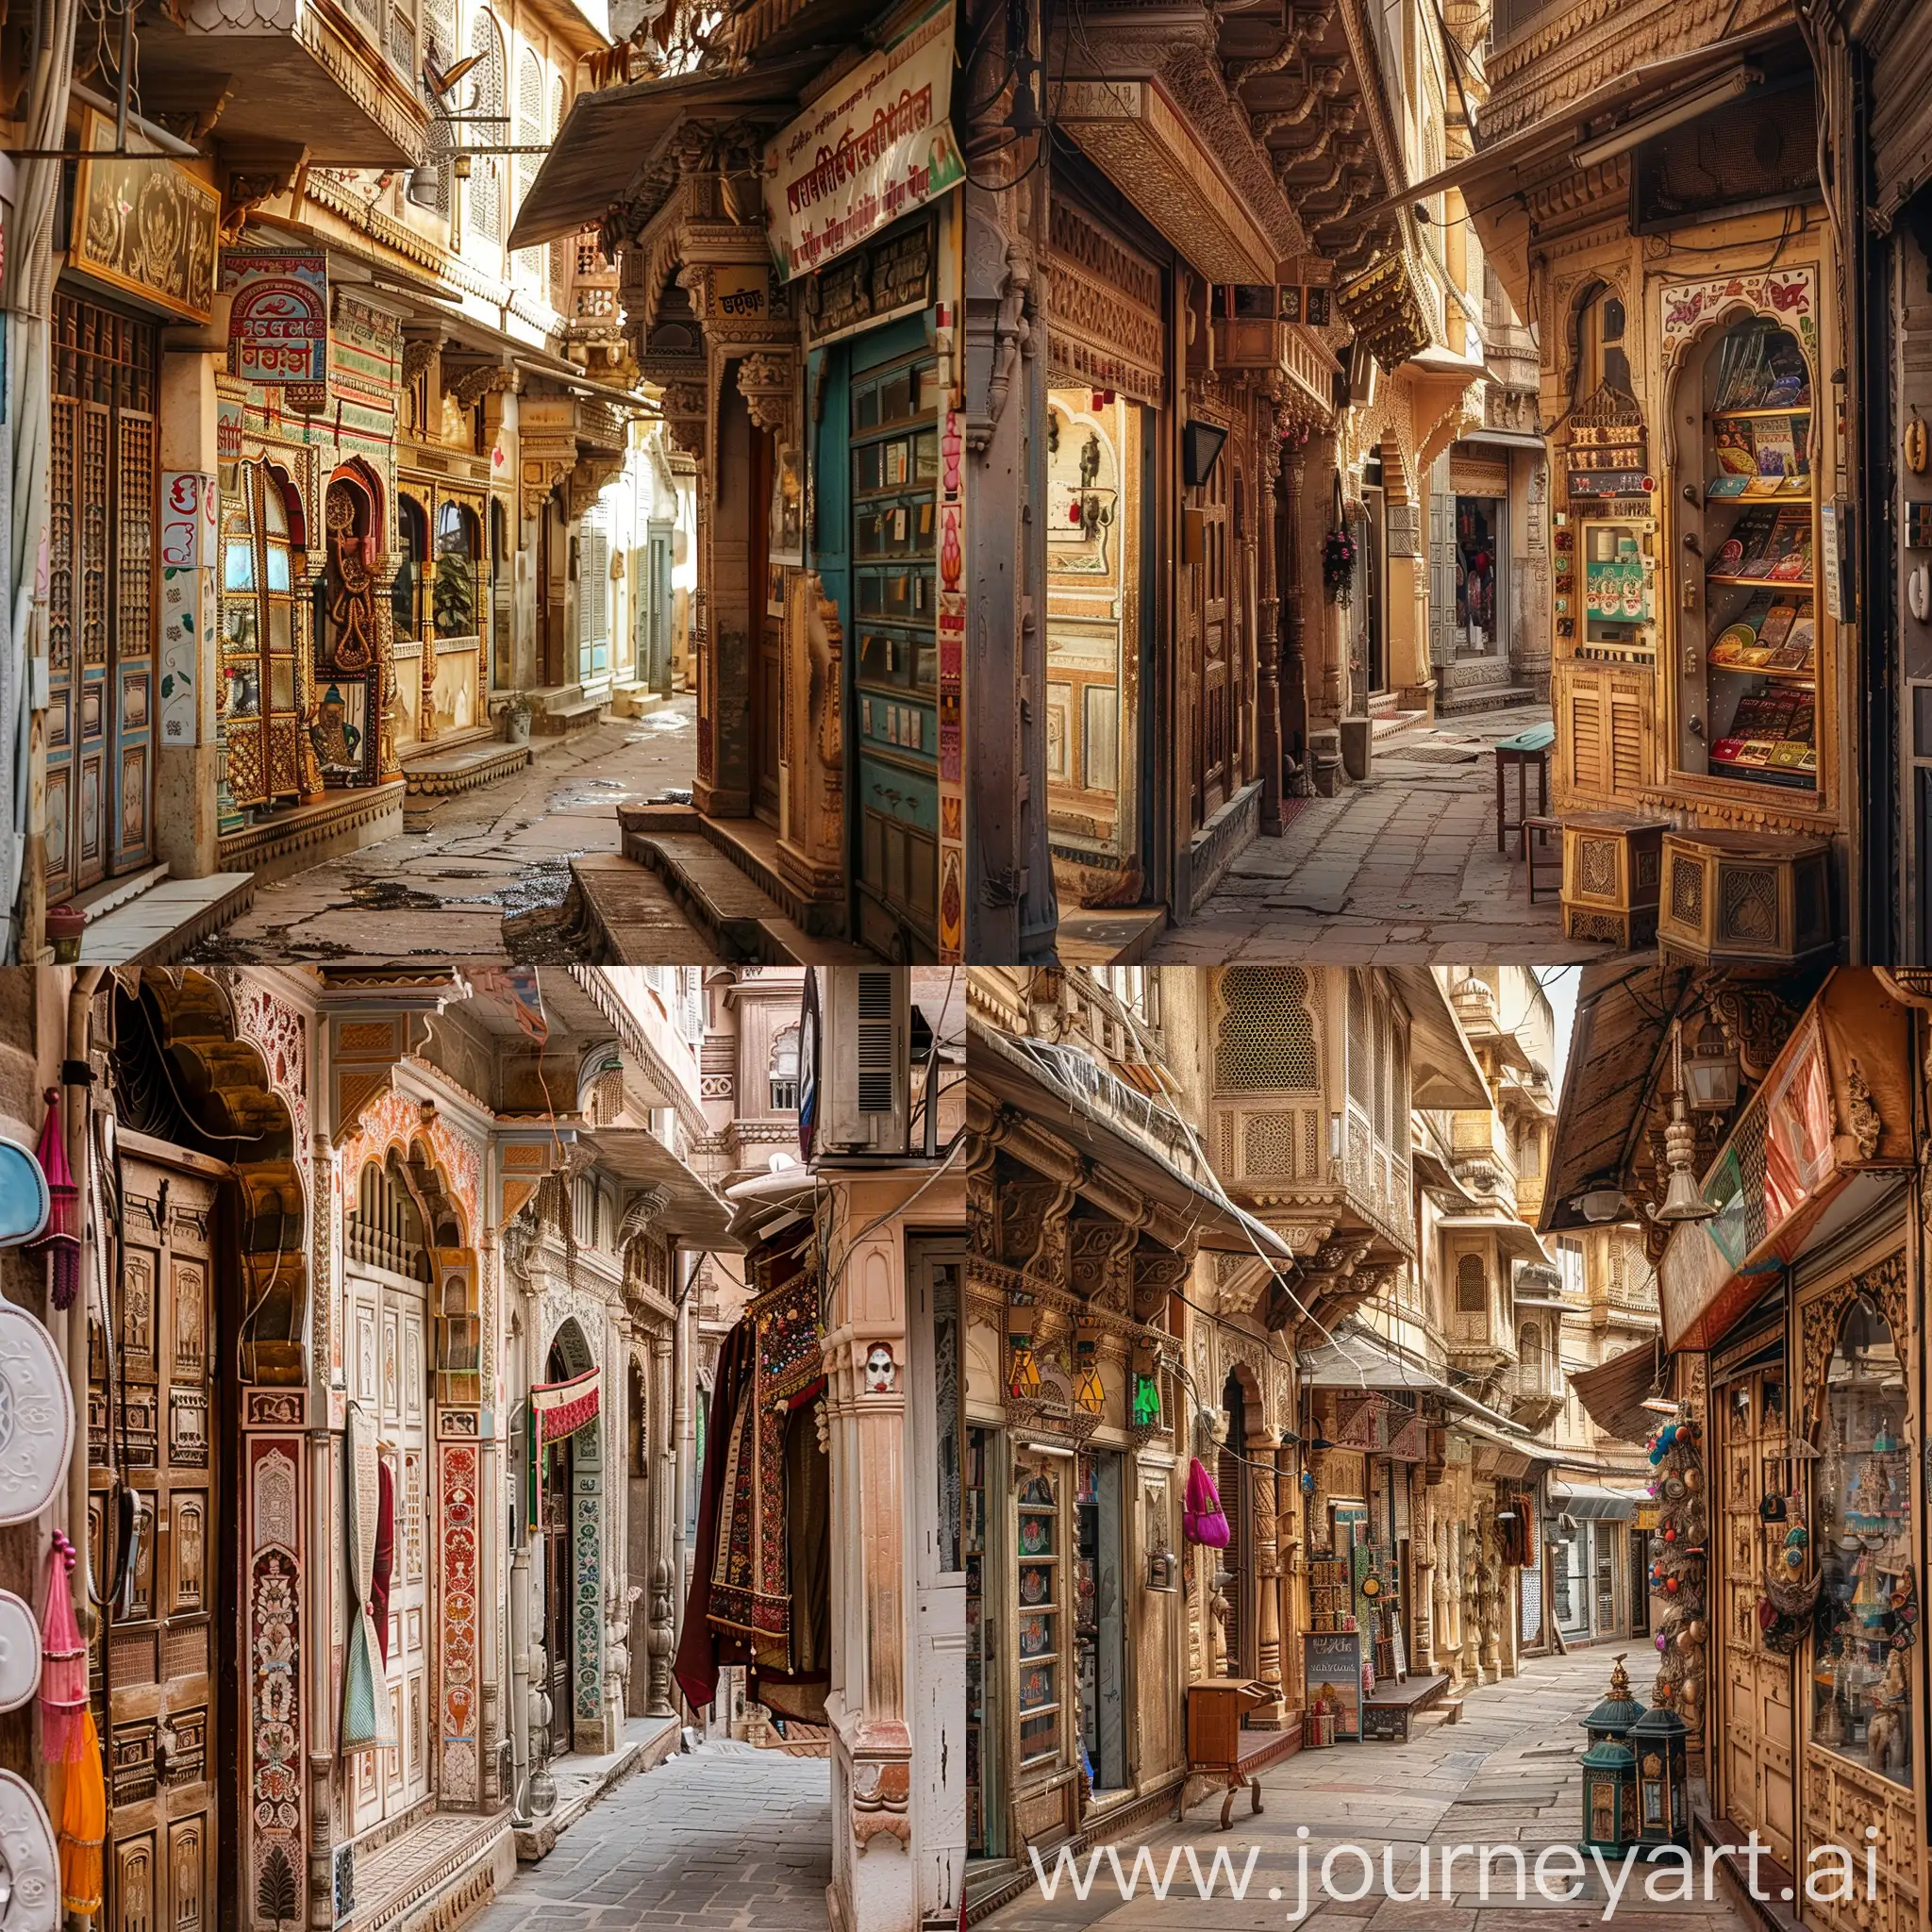 
Imagine walking down a narrow street in Rajasthan, surrounded by traditional shops with ornate facades. Each shop is unique, with its own style and character, making for a visually stunning scene.